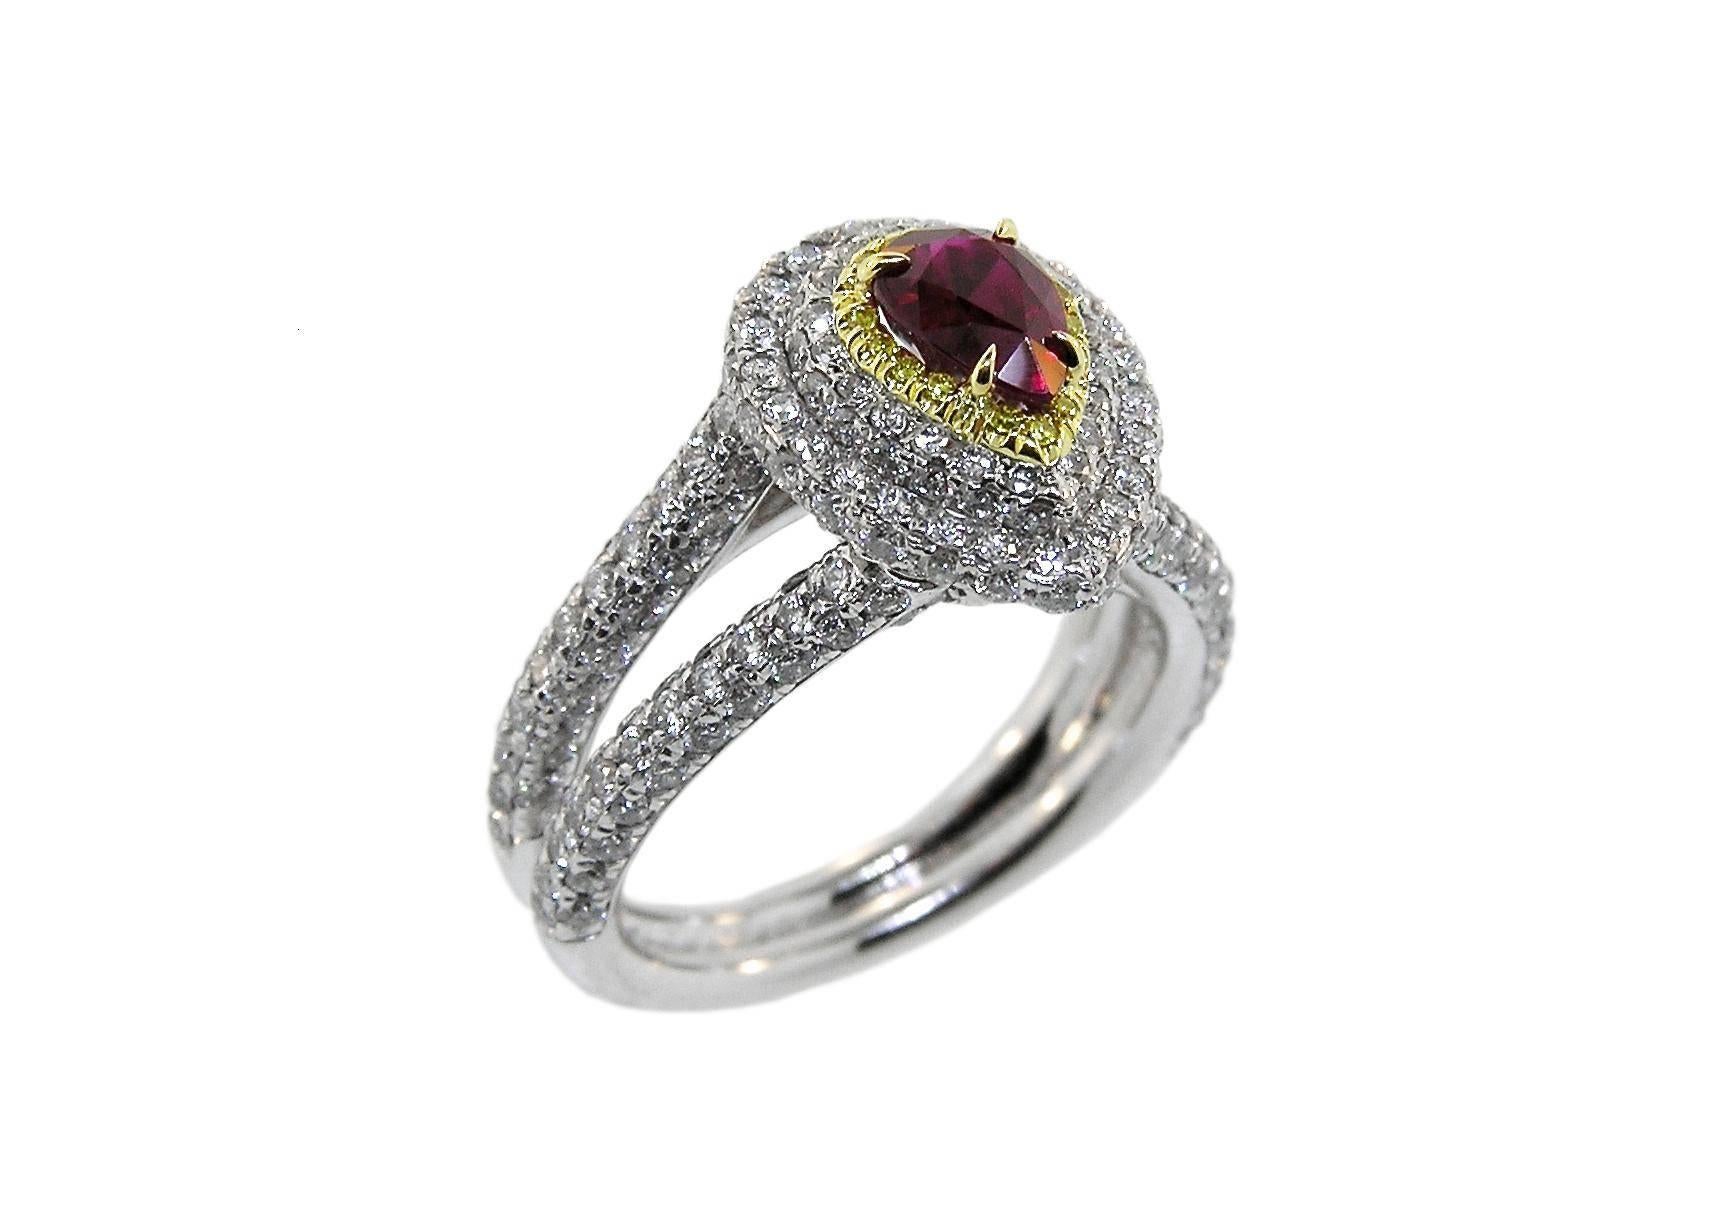 This ring, fabricated in our workshop, features a 1.02 Carat Ruby of exceptional color with flashes of bright red.  It is surrounded by a halo of Natural Canary Diamonds and several tiers of D Color White Diamonds.  Total weight in Diamonds is 1.91